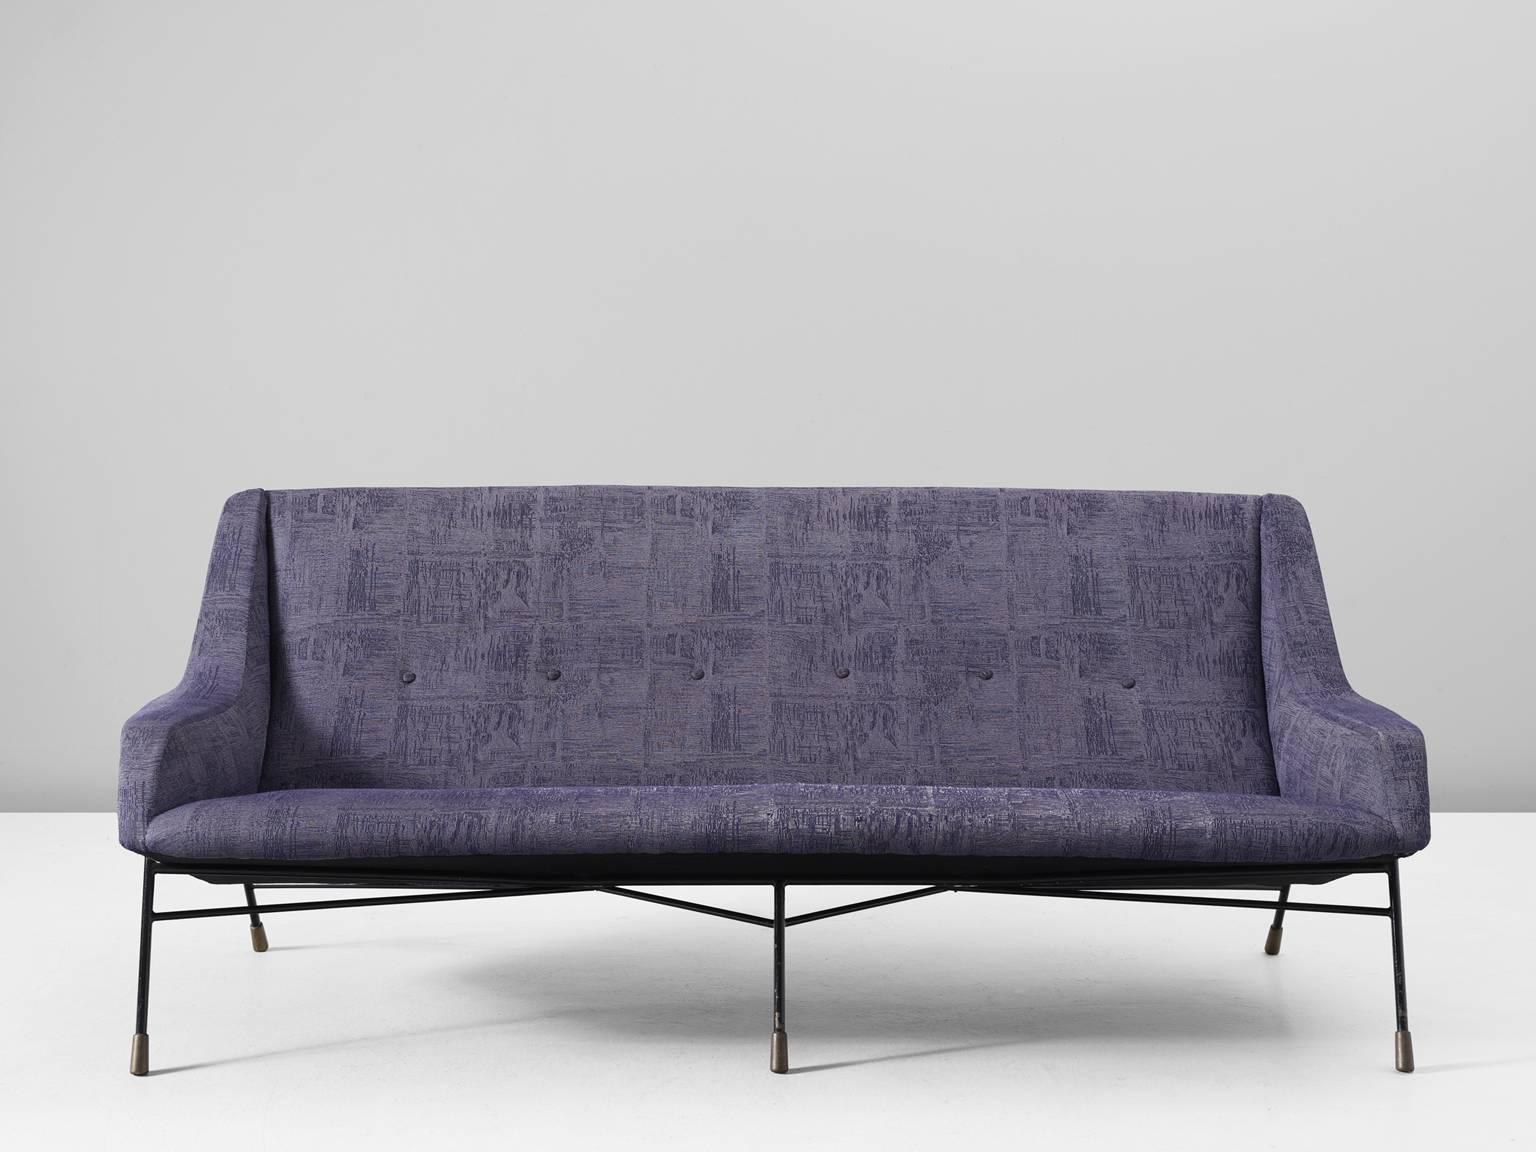 Sofa model S12 in fabric, metal and brass by Alfred Hendrickx for Belform, Belgium, 1950s.

Rare sofa in blue-purple upholstery by Belgian designer Alfred Hendrickx. The model shows a lot of influences on some Italian designs by shape and